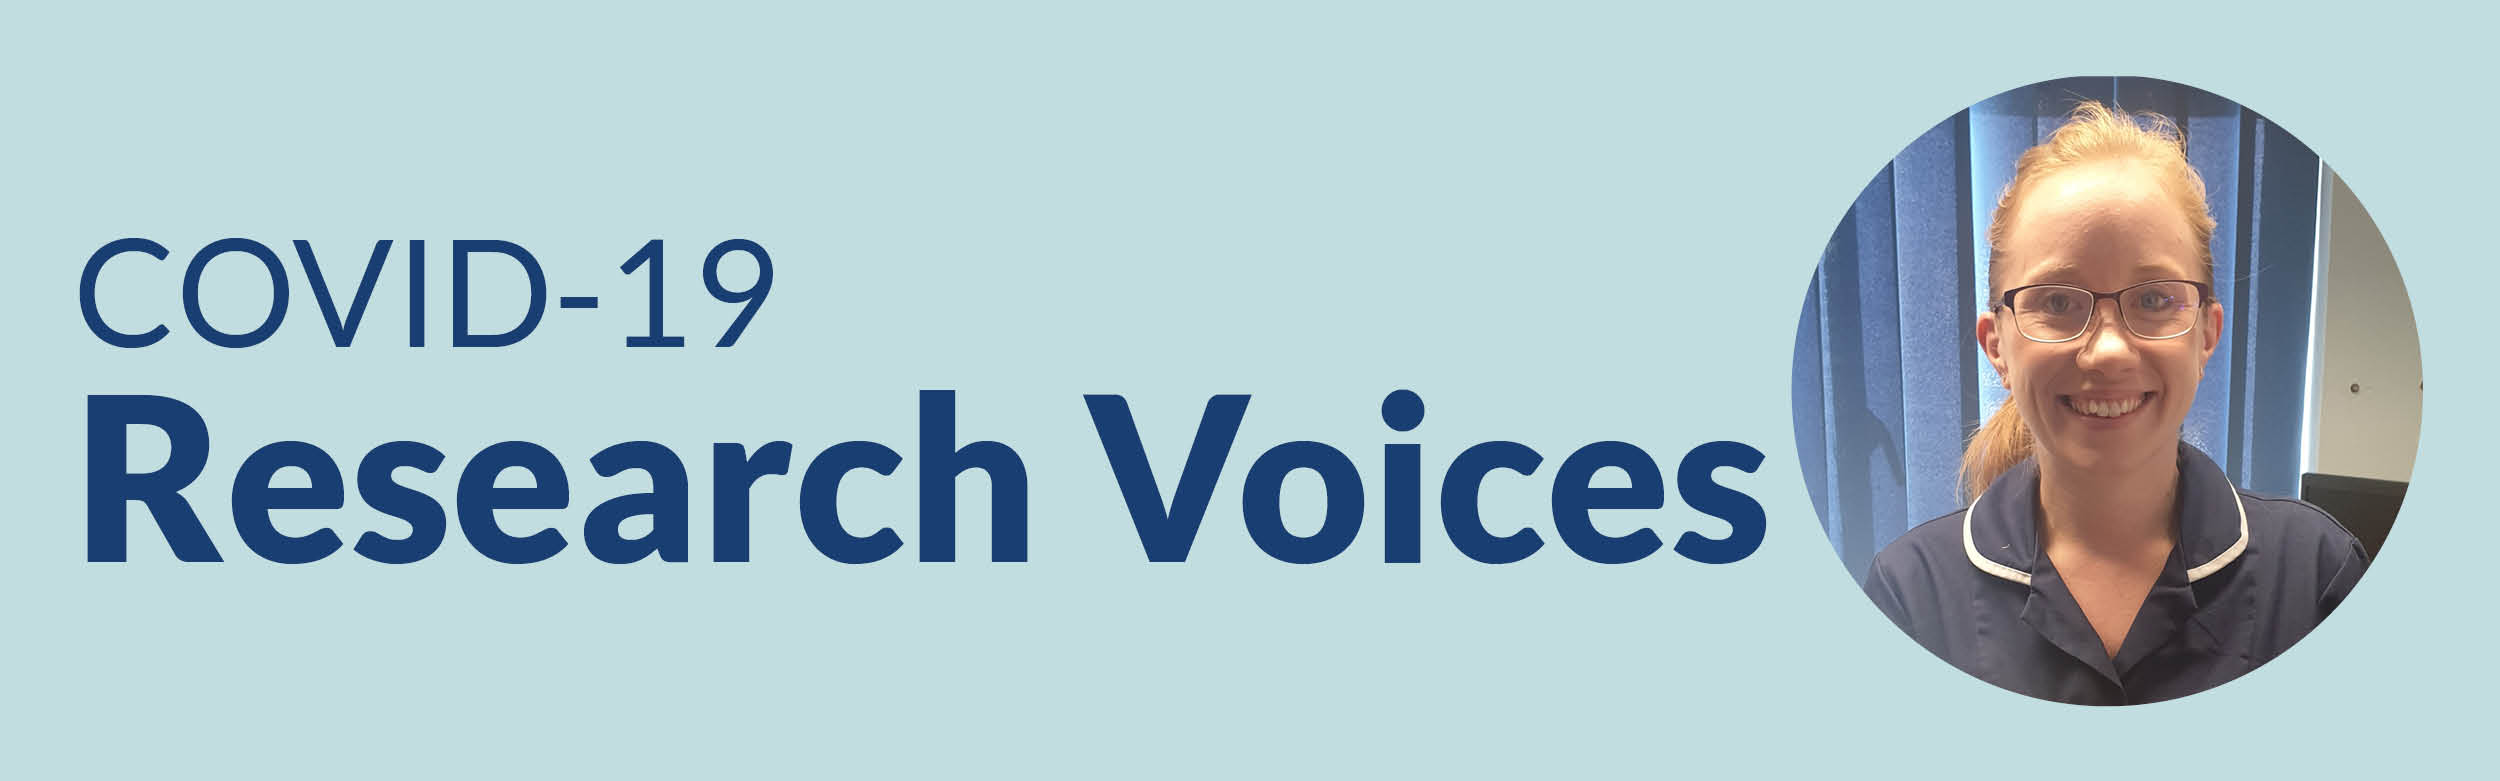 Covid-19 Research Voices: Heather Willis